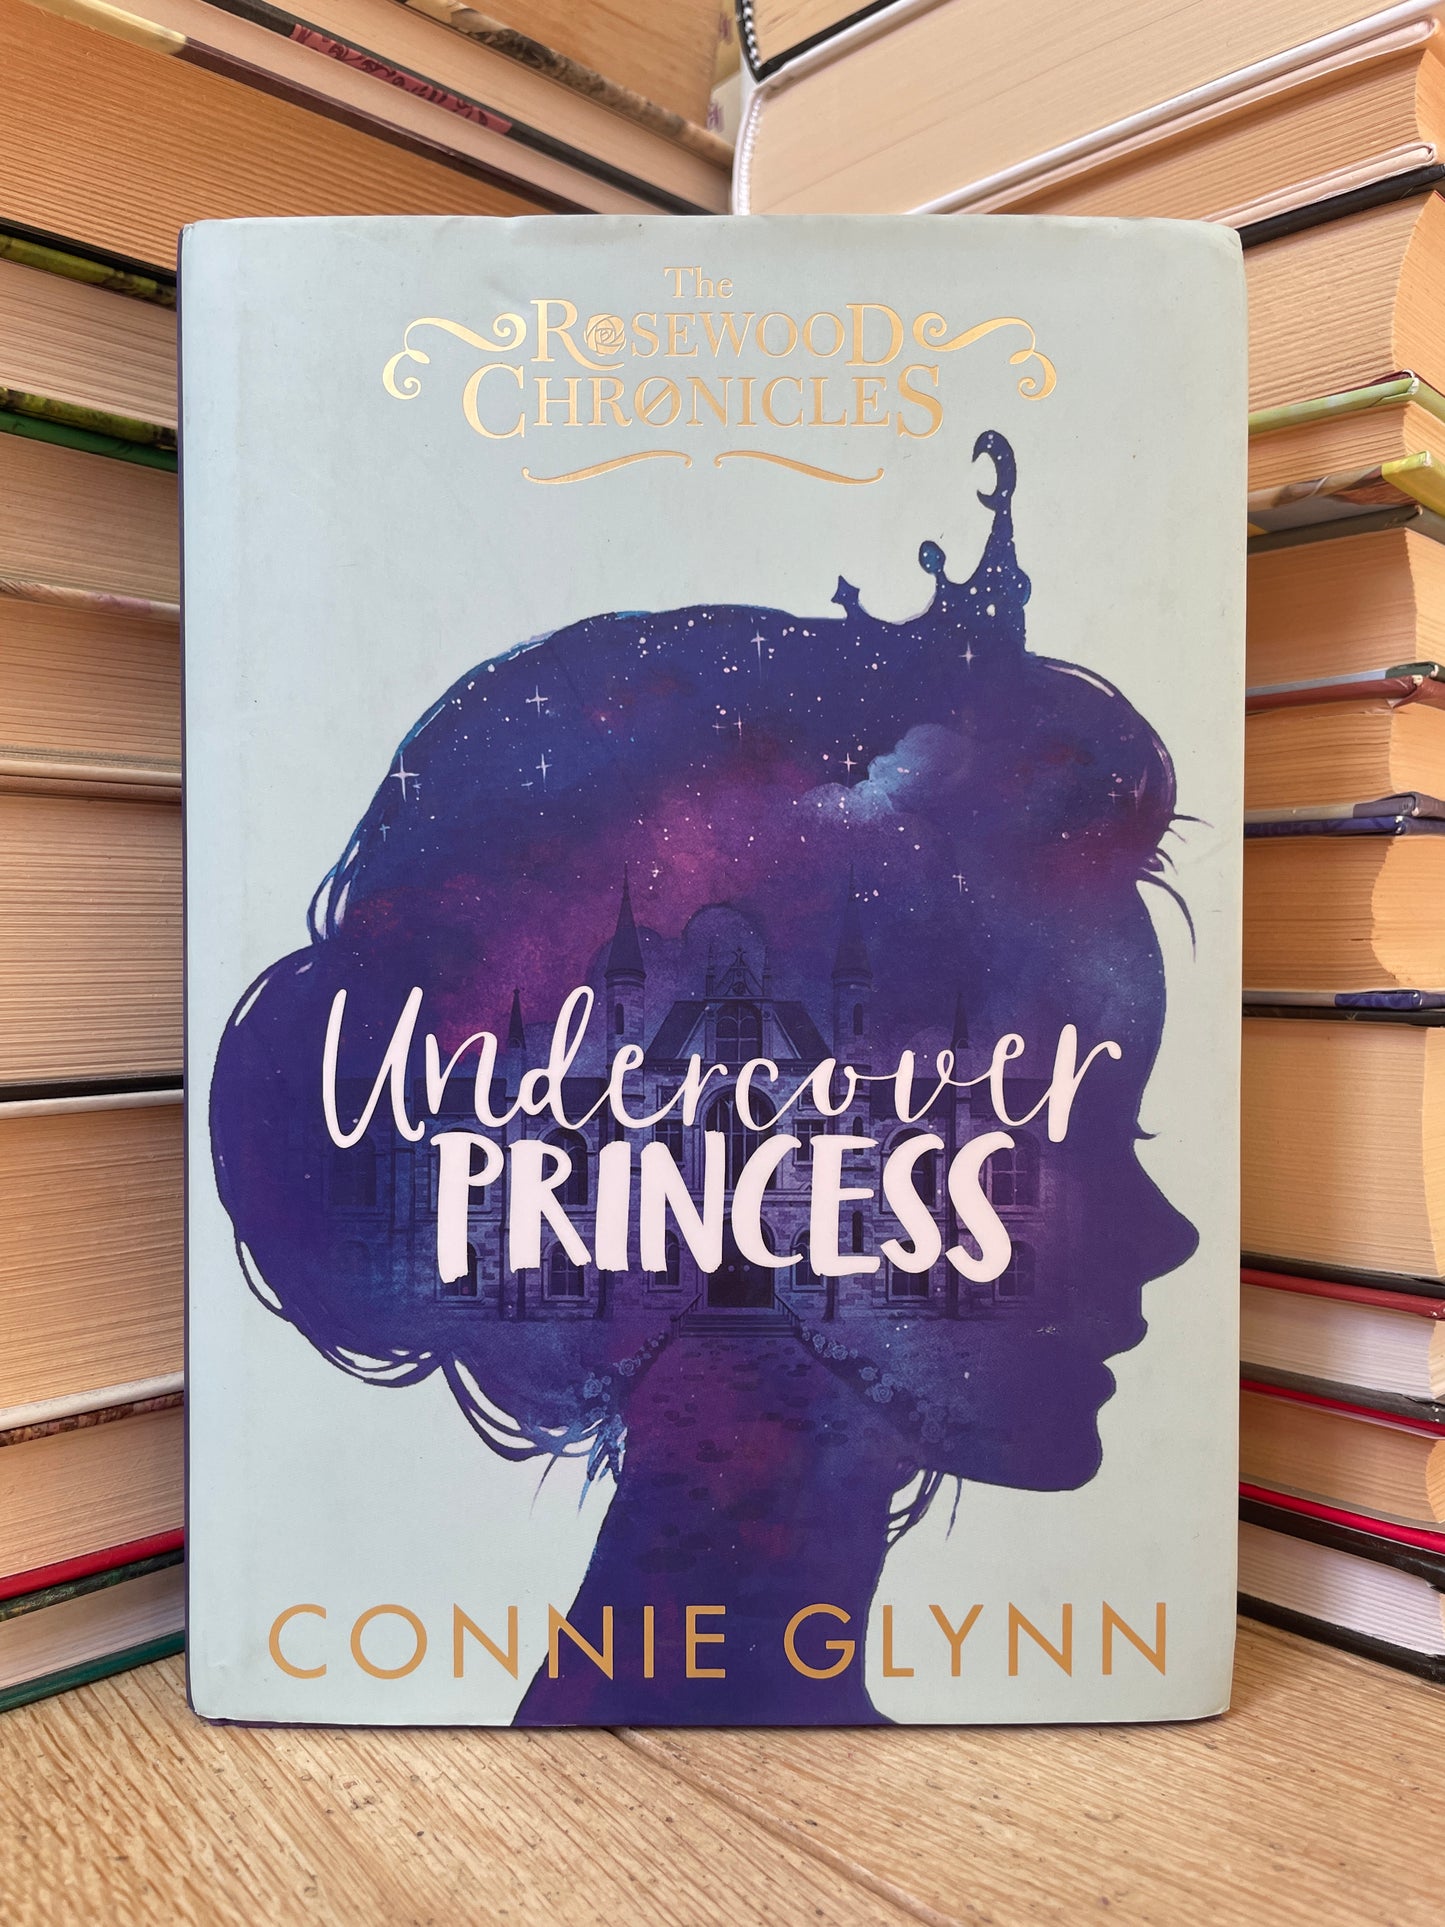 Connie Glynn - The Rosewood Chronicles: Undercover Princess